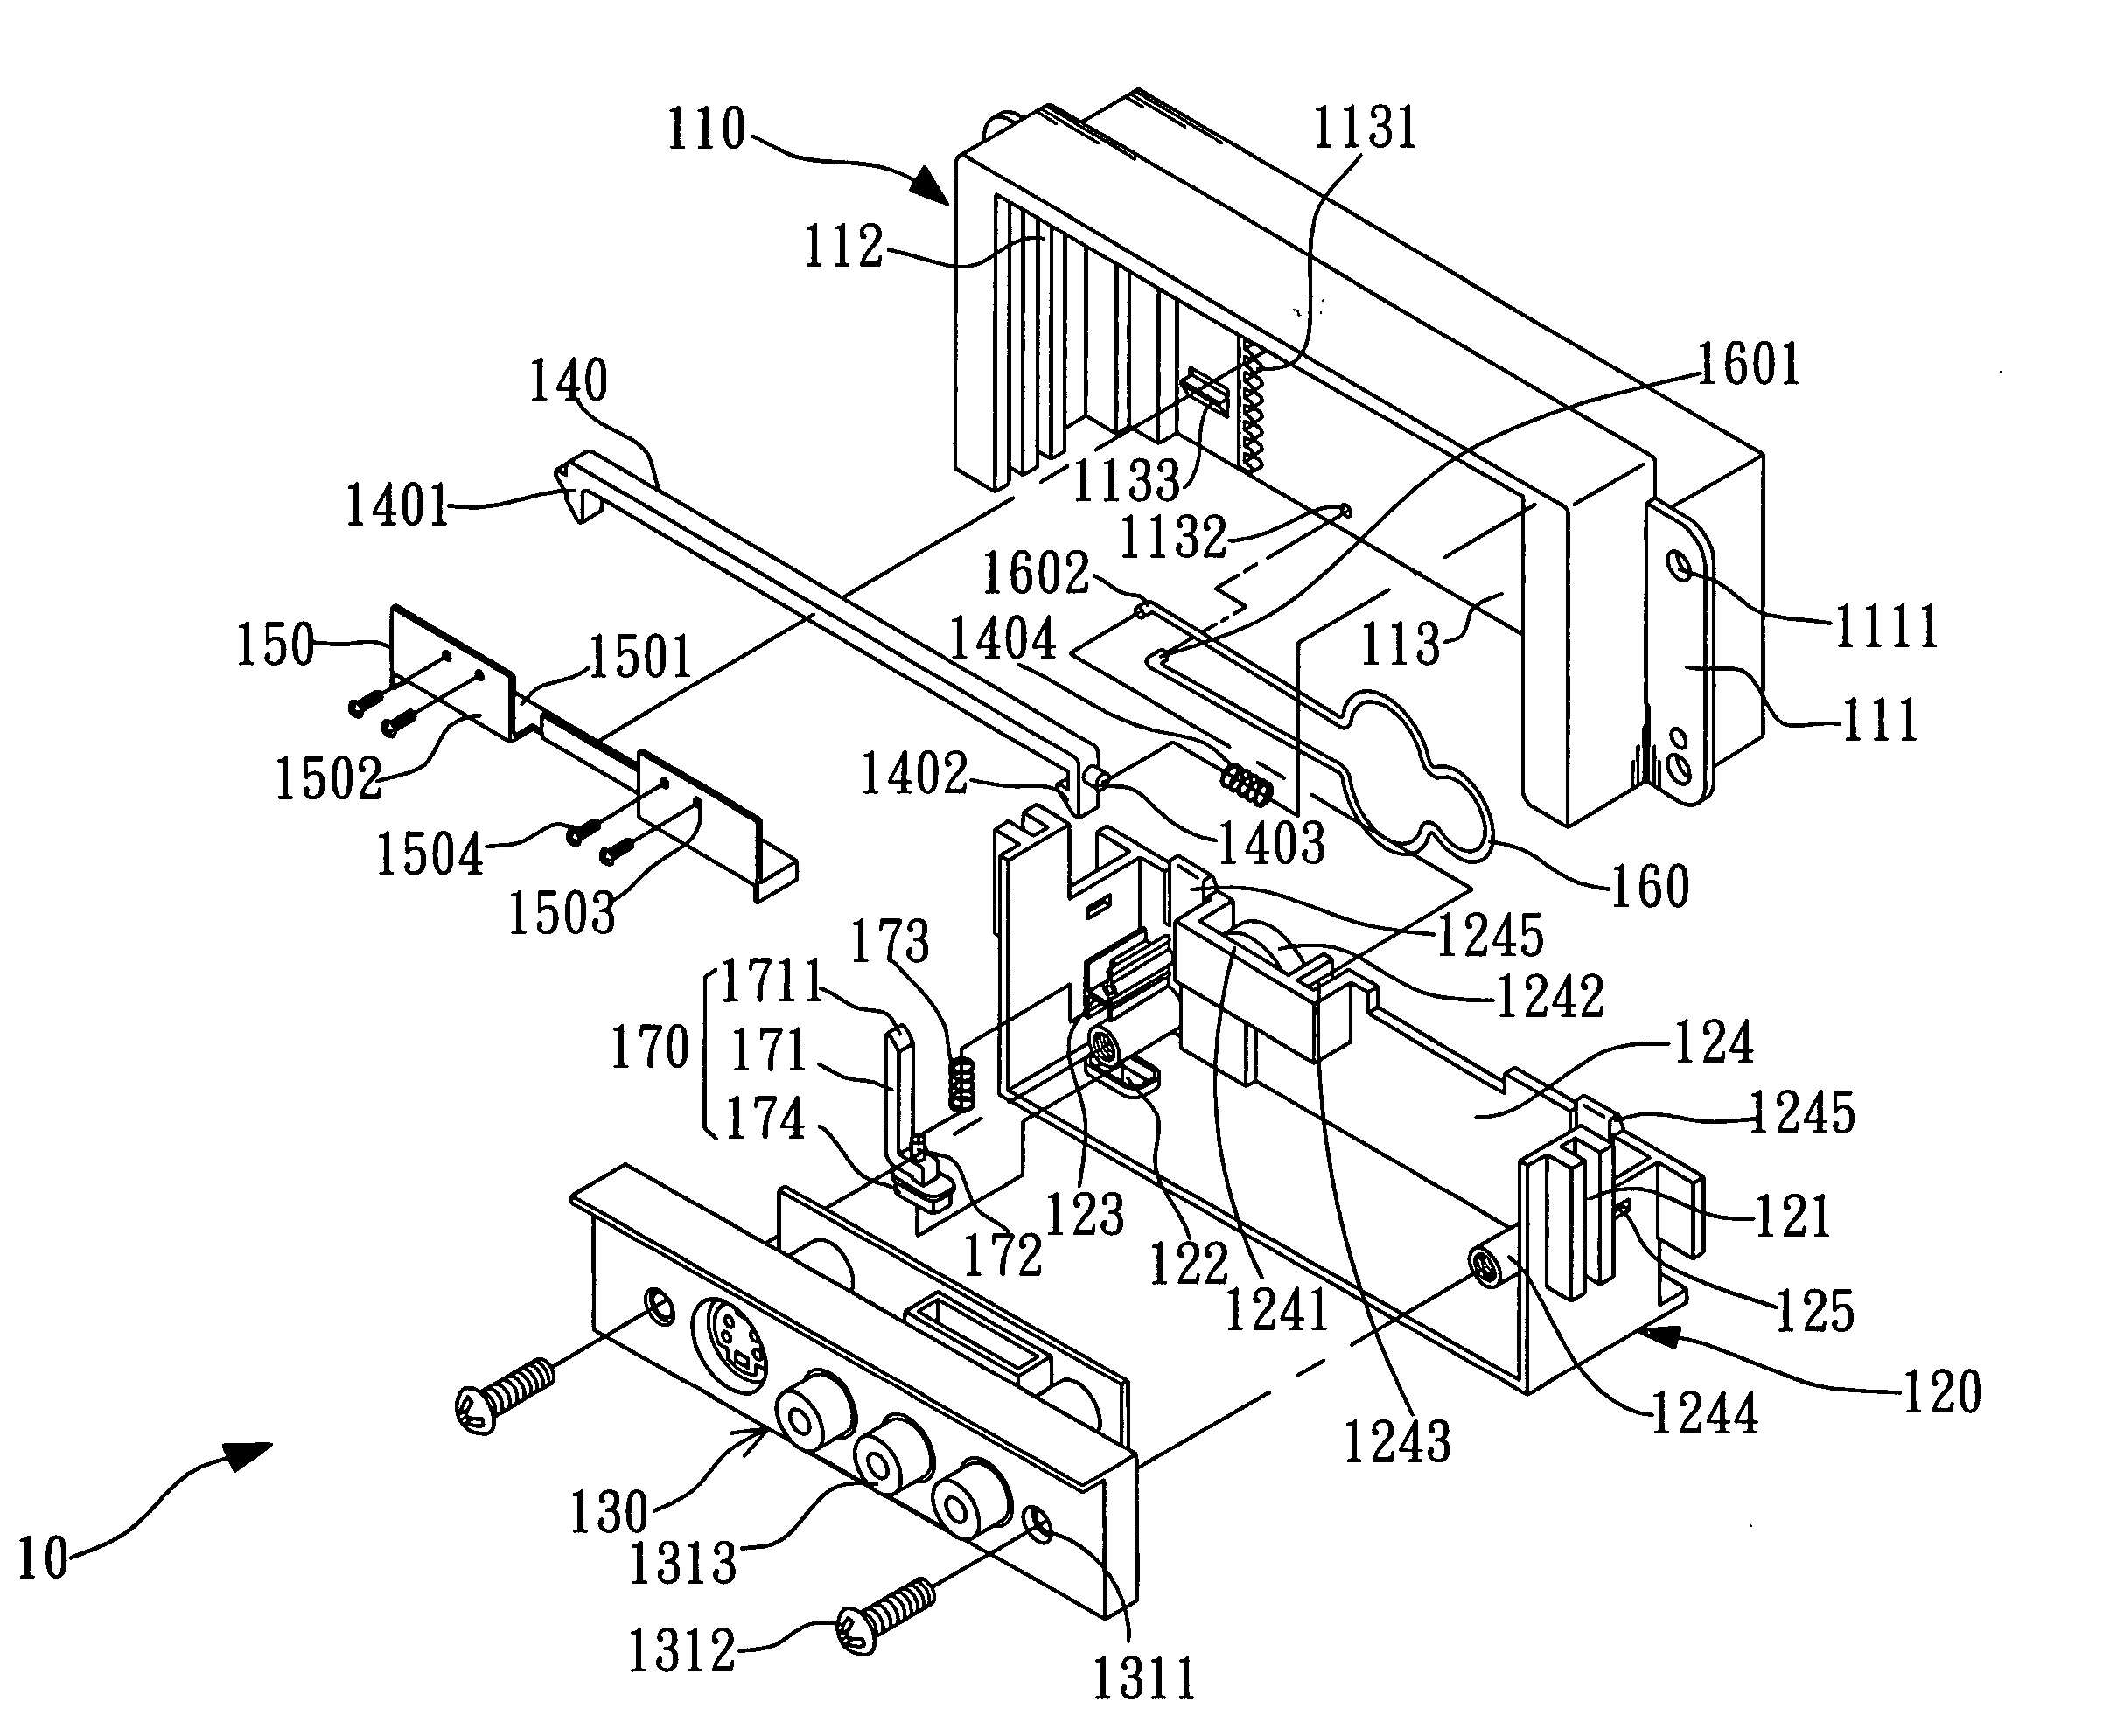 Interface pannel structure